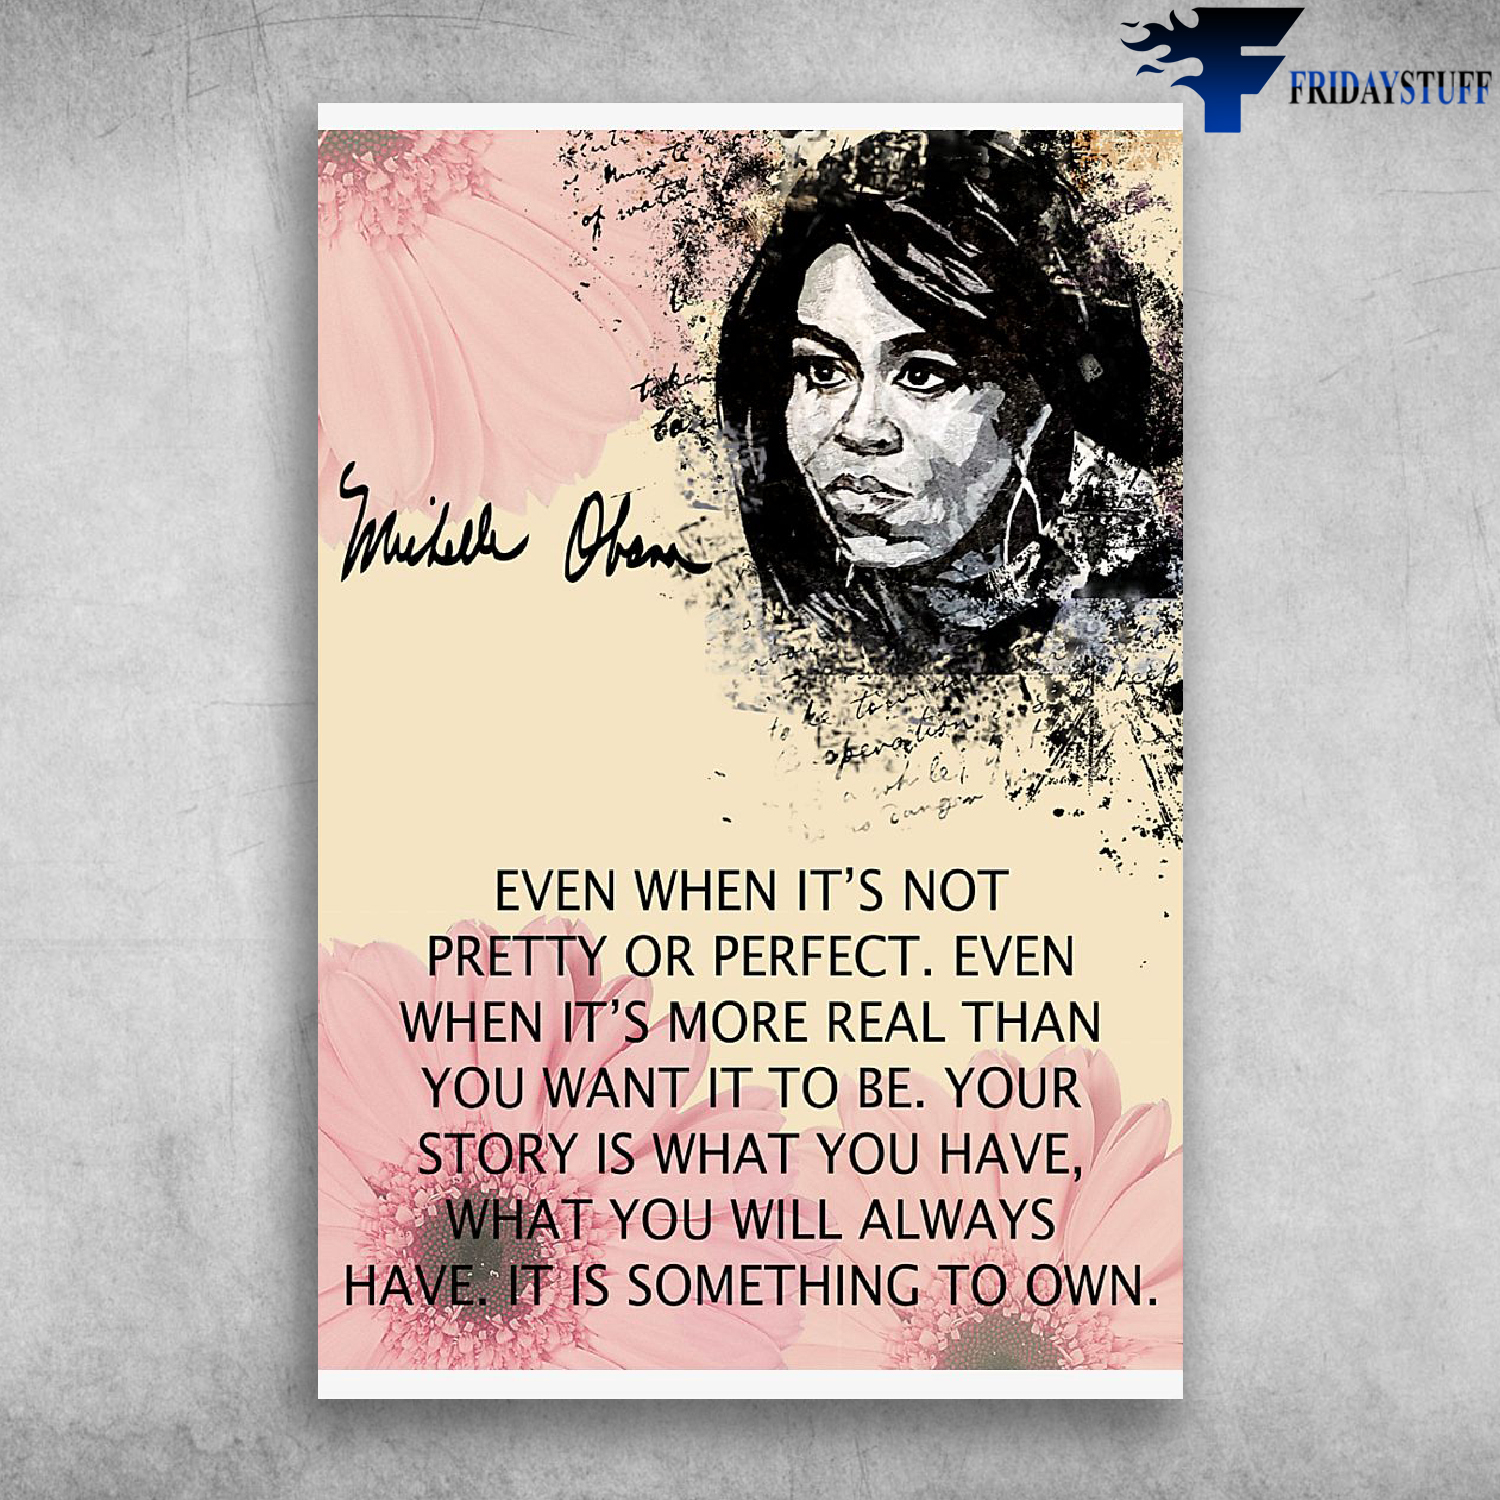 Michelle Obama - Even when it’s not pretty or perfect. Even when it’s more real that you want it to be.